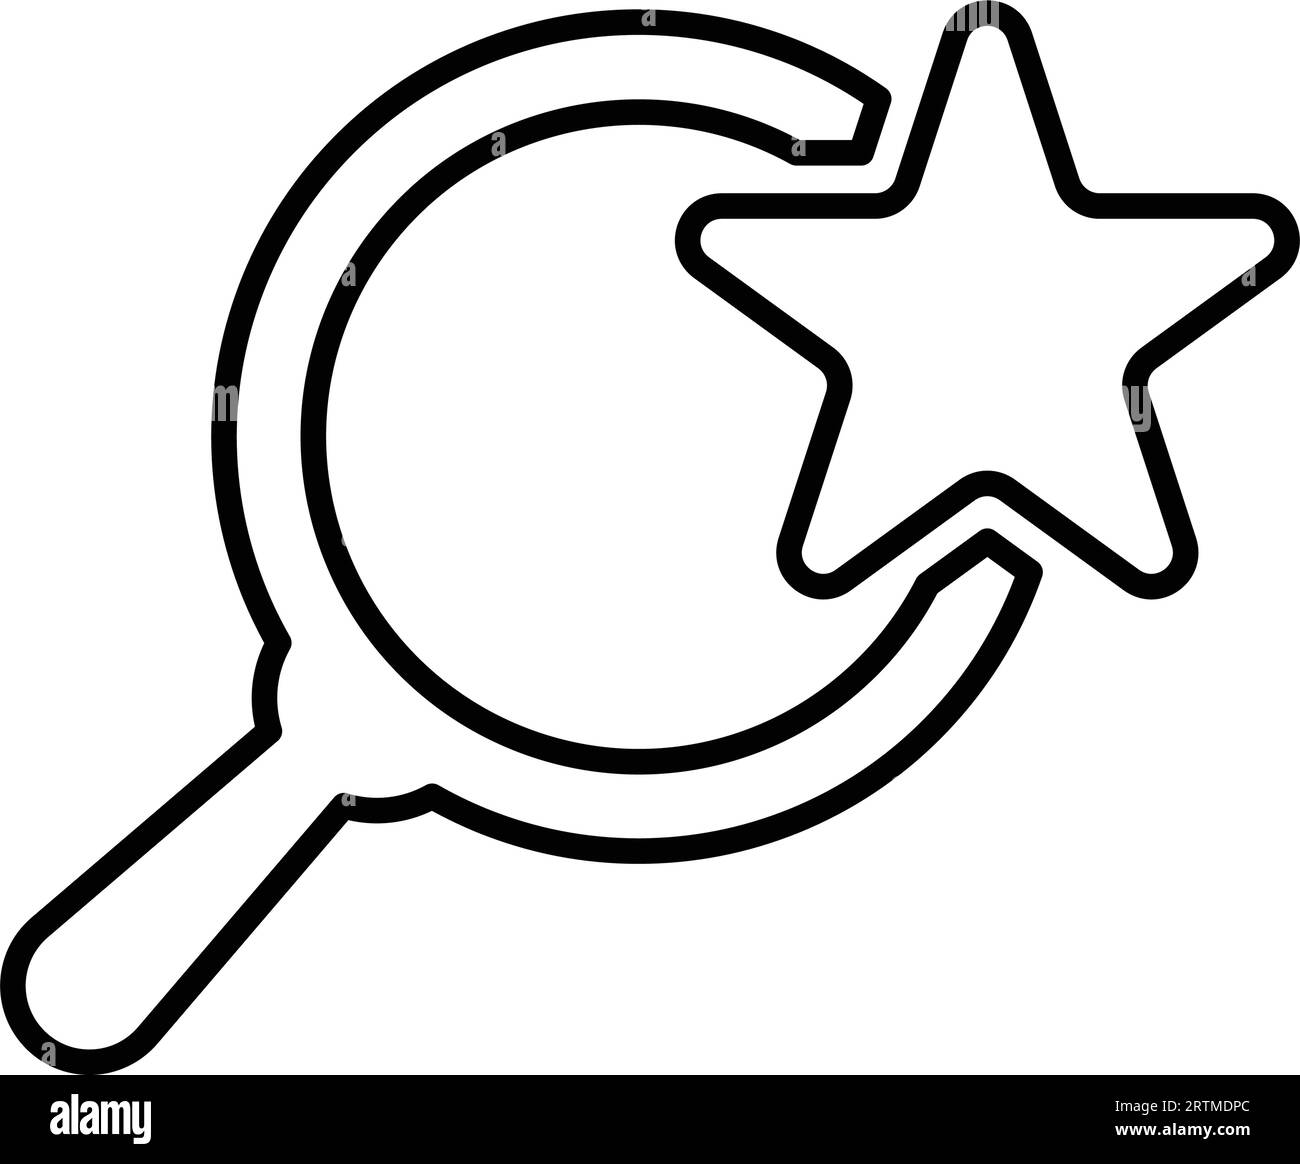 Favorite search vector icon. Use for designing and developing websites, commercial purposes, print media, web or any type of design task. Stock Vector